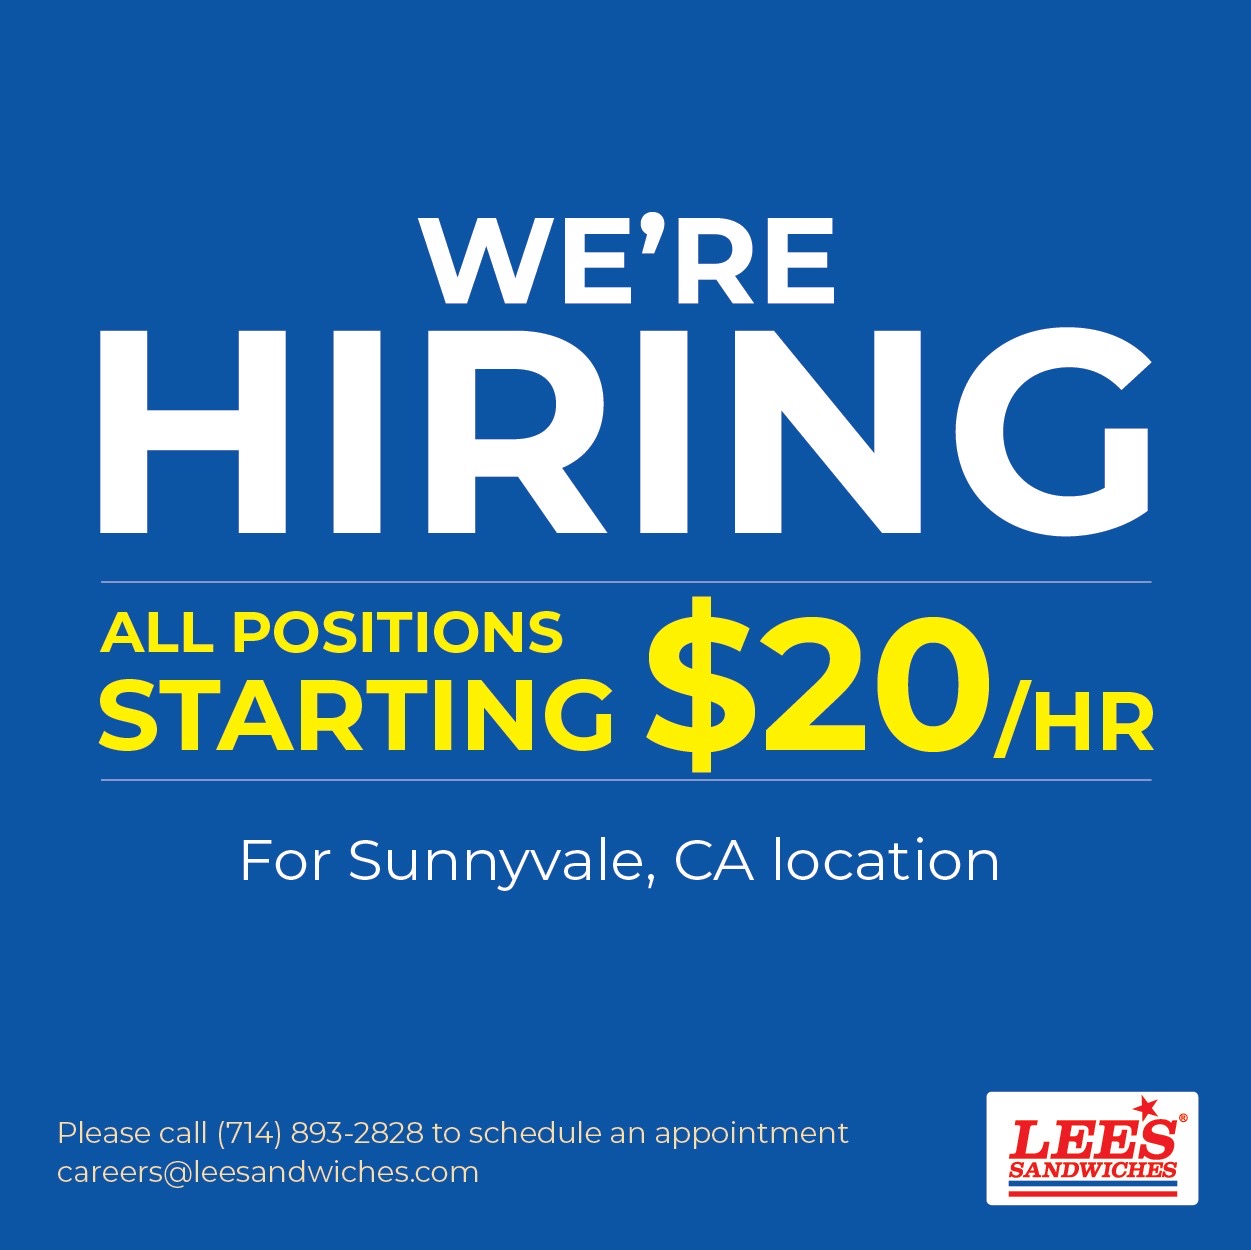 We're HIRING NOW, please join our team at Sunnyvale, CA location!